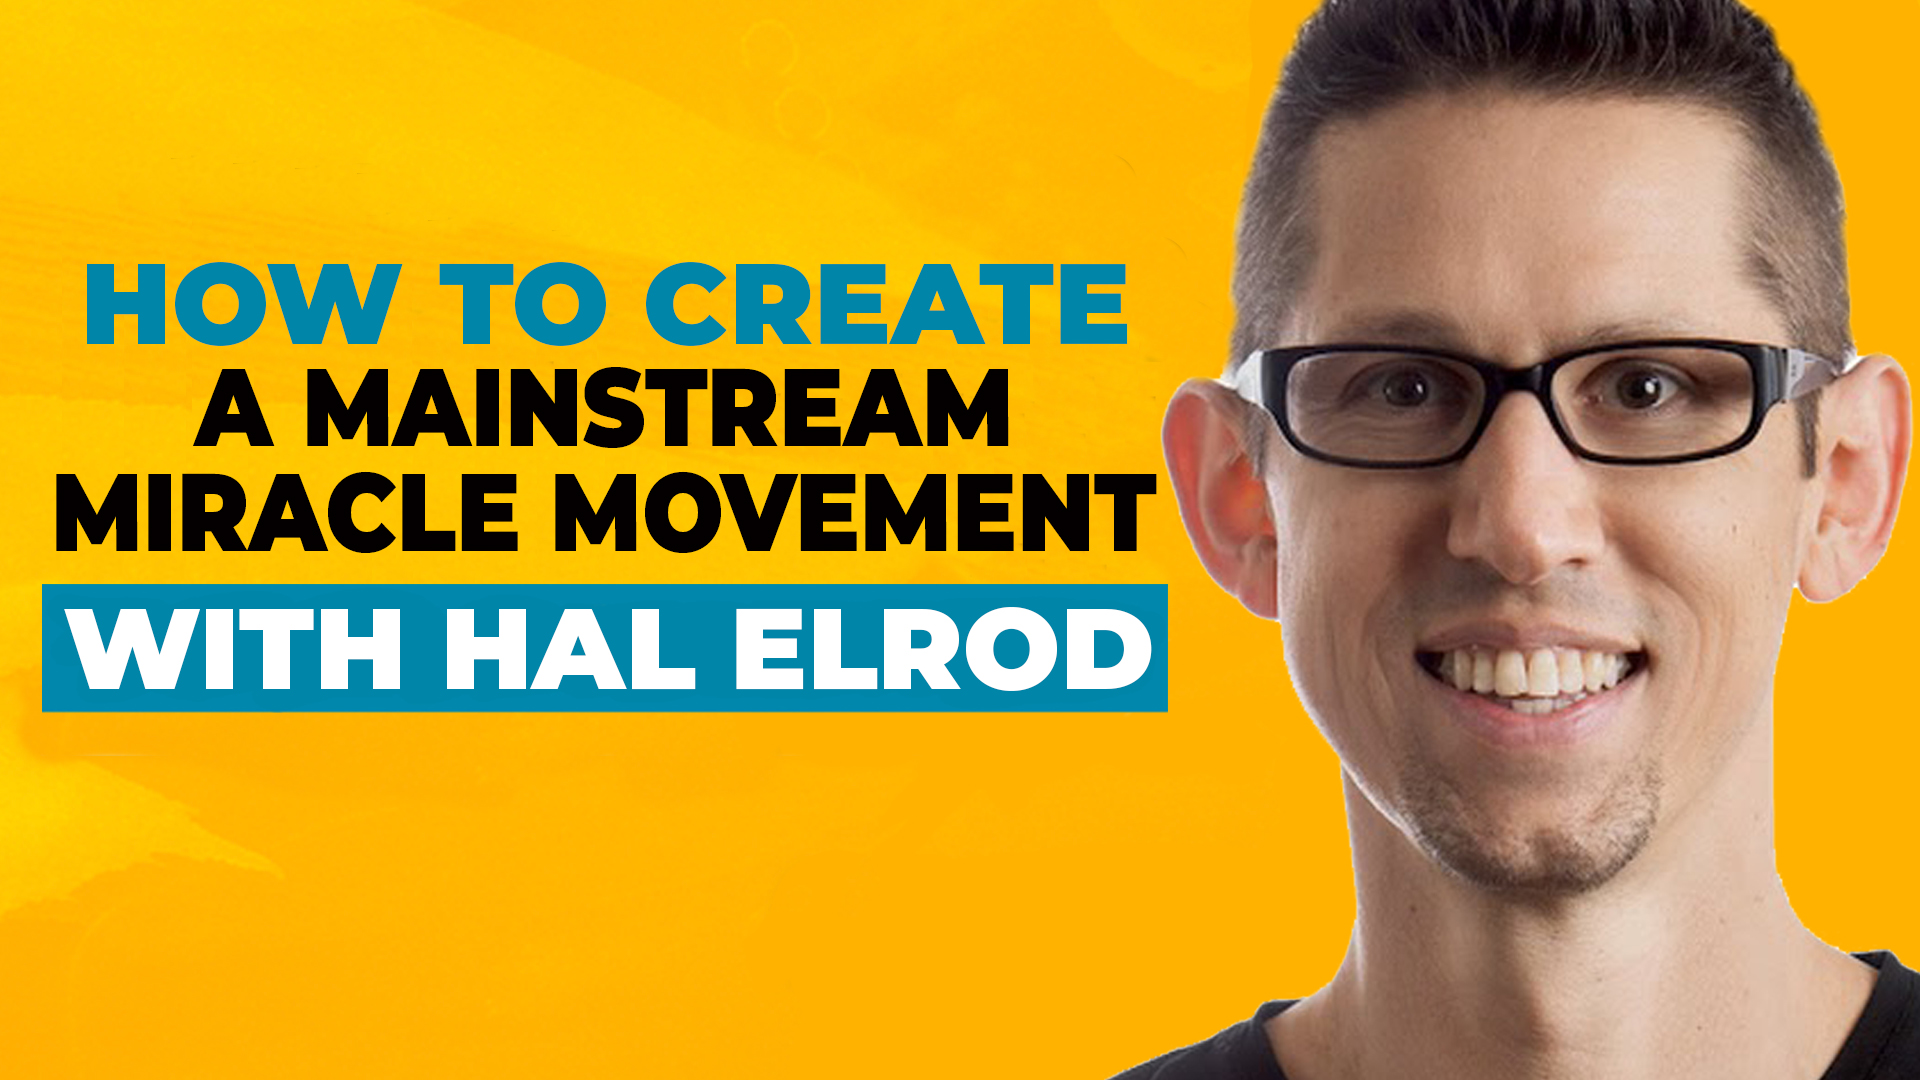 A photo of Hal Elrod on a bold yellow background, along with text reading "How to Create a Mainstream Miracle Movement with Hal Elrod."